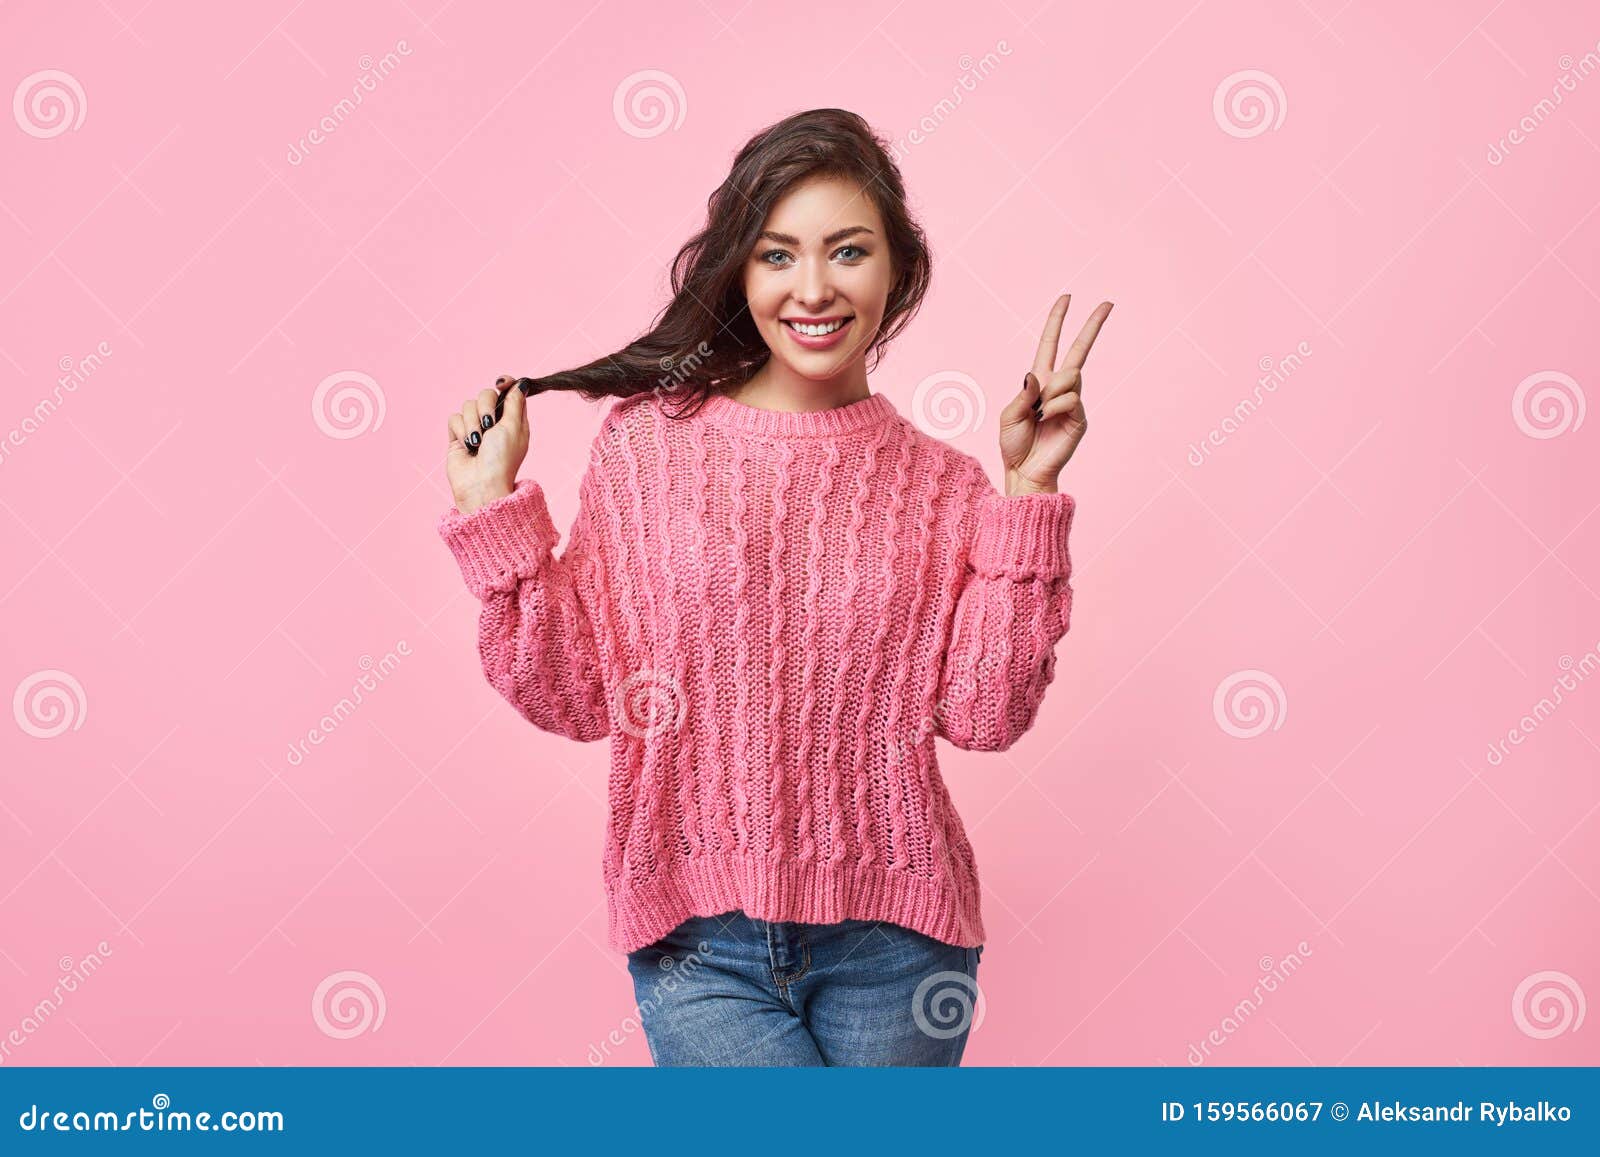 Portrait of a Happy Cheerful Girl Showing Peace Gesture with Hand ...